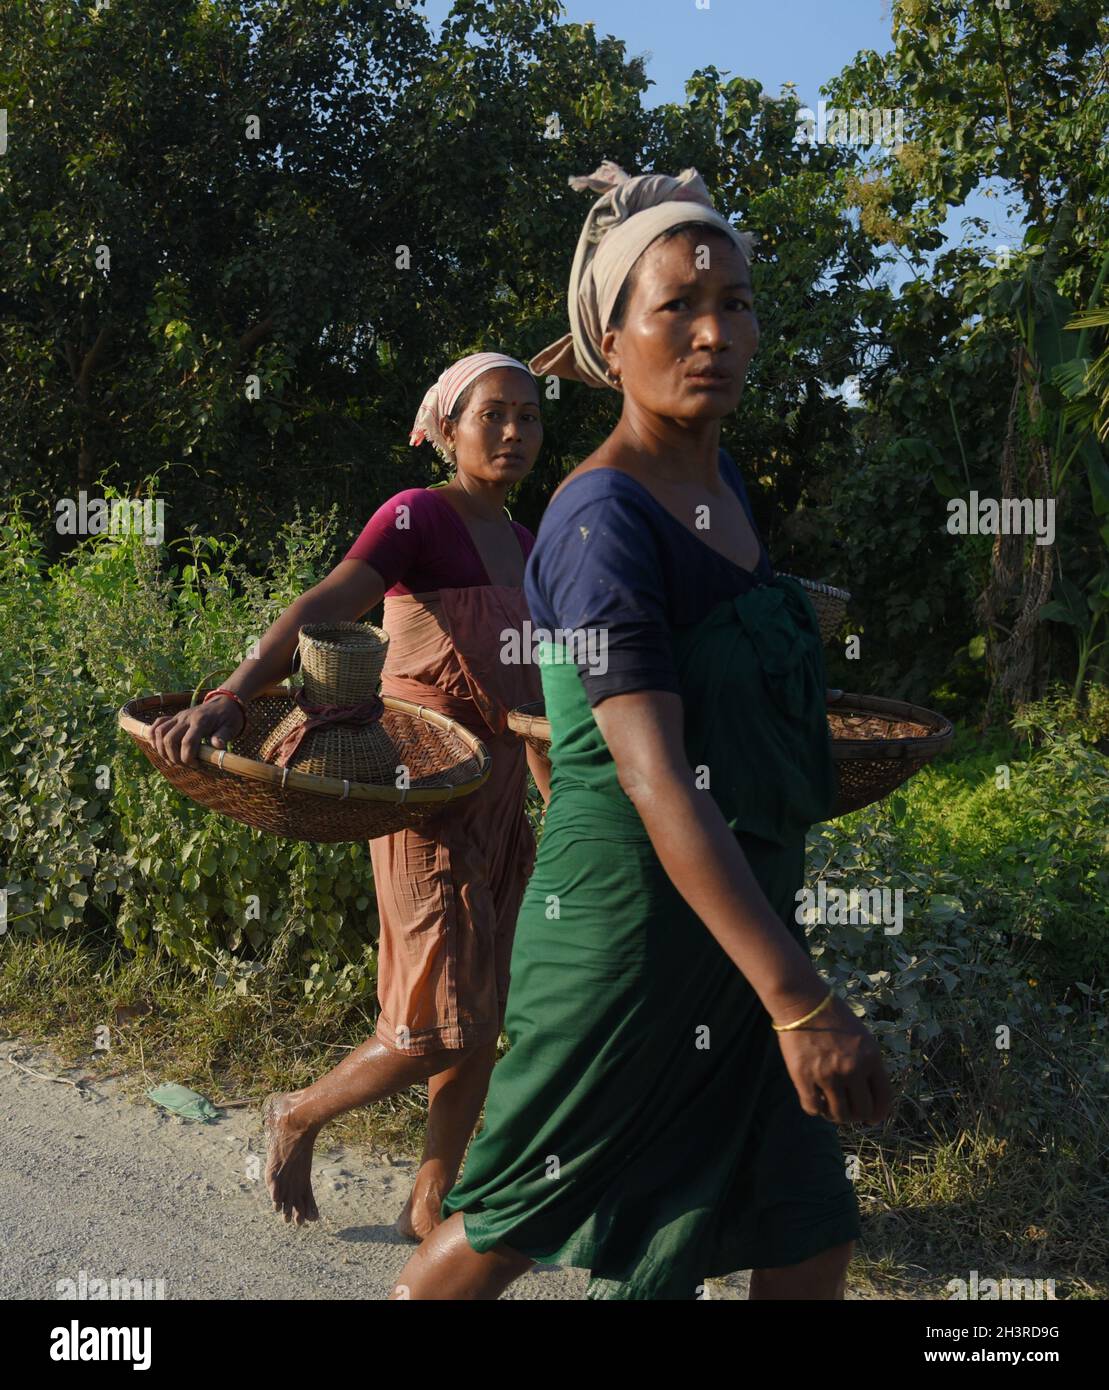 Bodo community women searching fish in a mud water field using traditional fishing  equipment Jakoi at a village on September 15, 2021 in Baksa, India Stock  Photo - Alamy